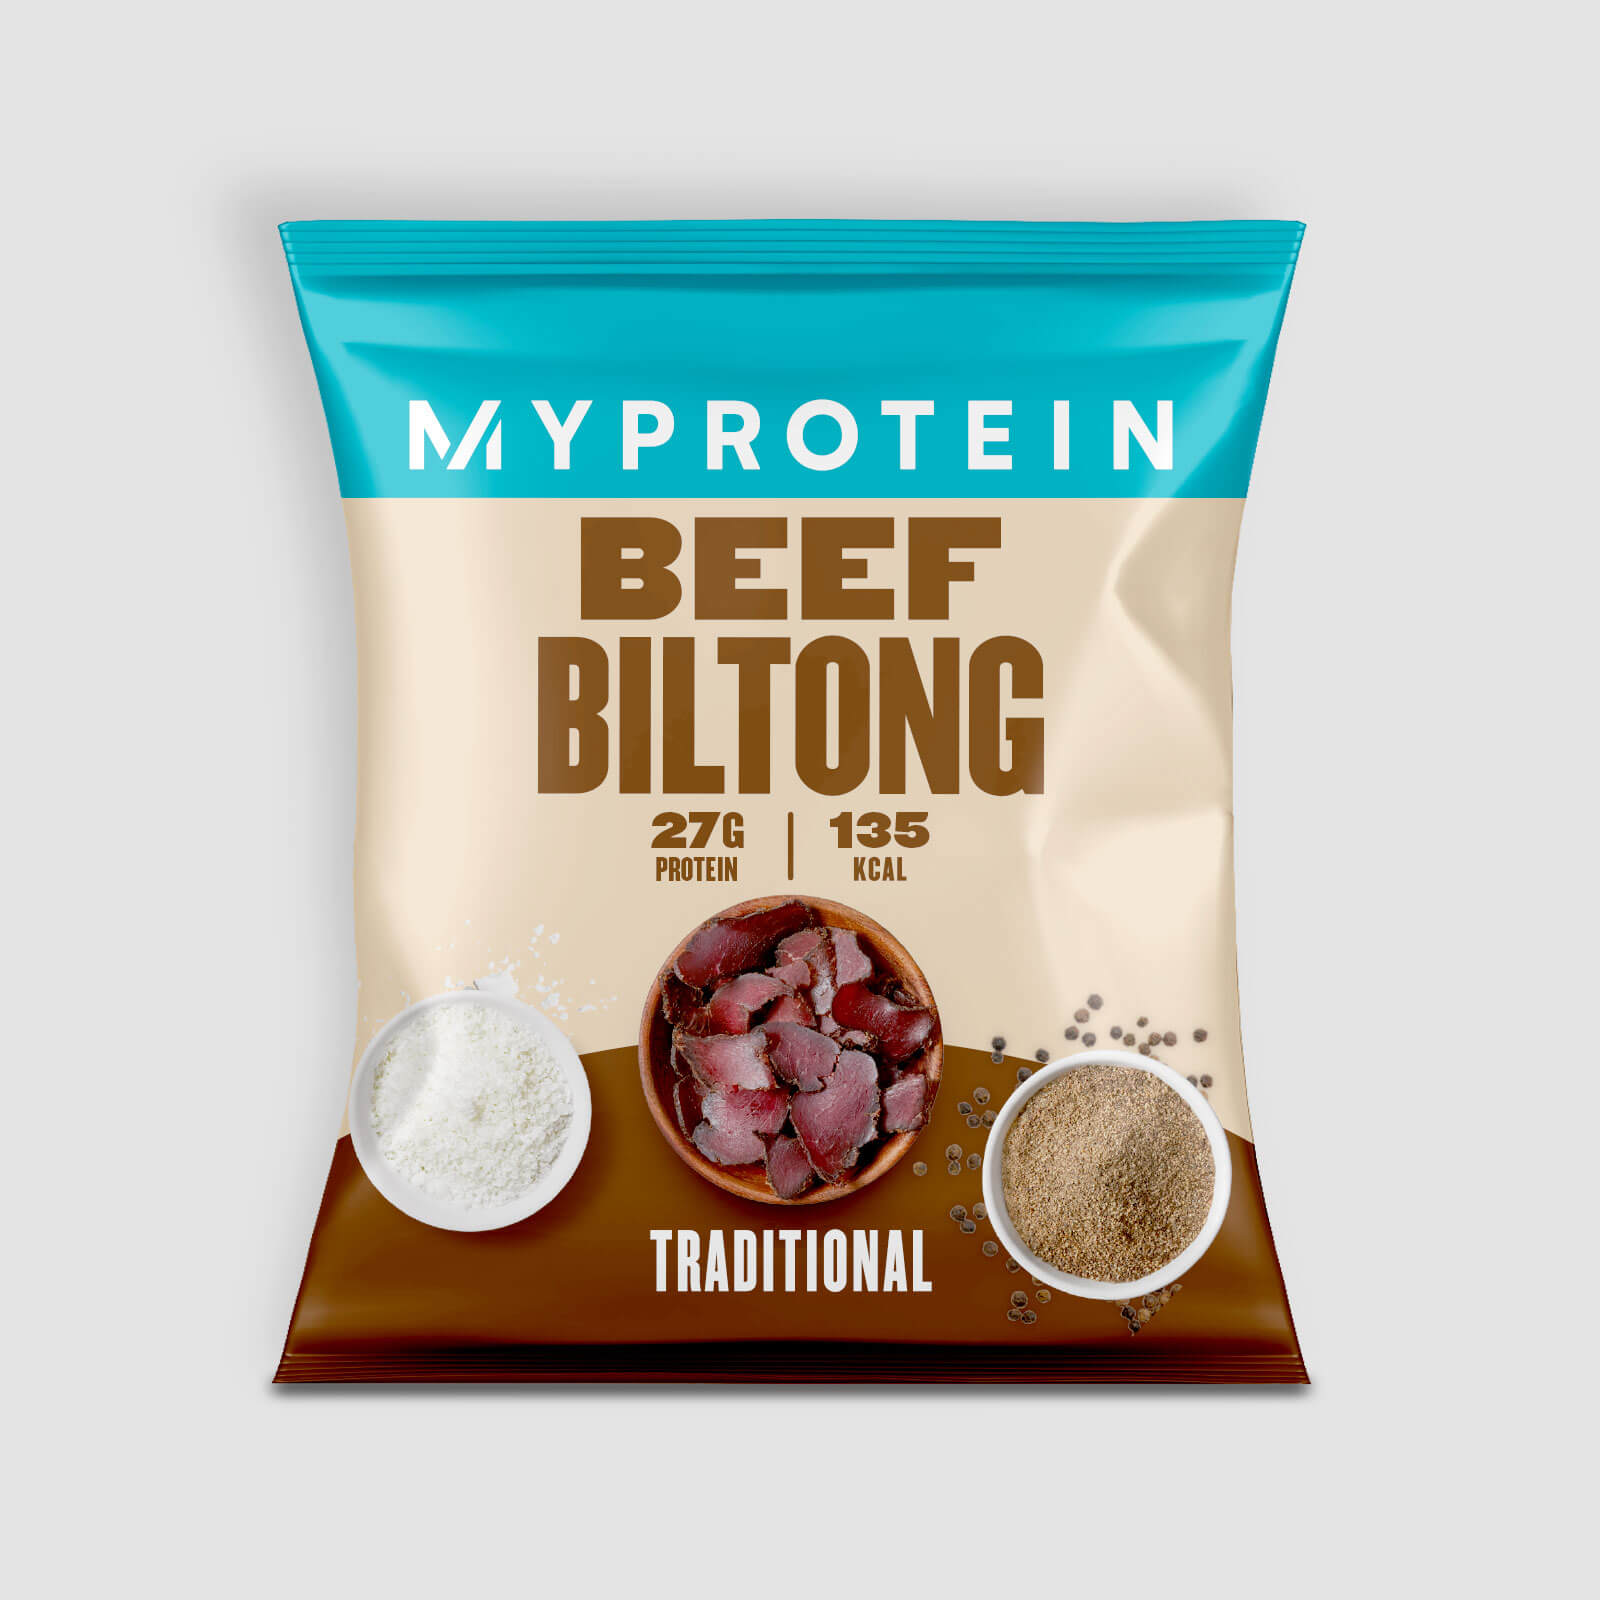 Myprotein Biltong - 50g - Traditional